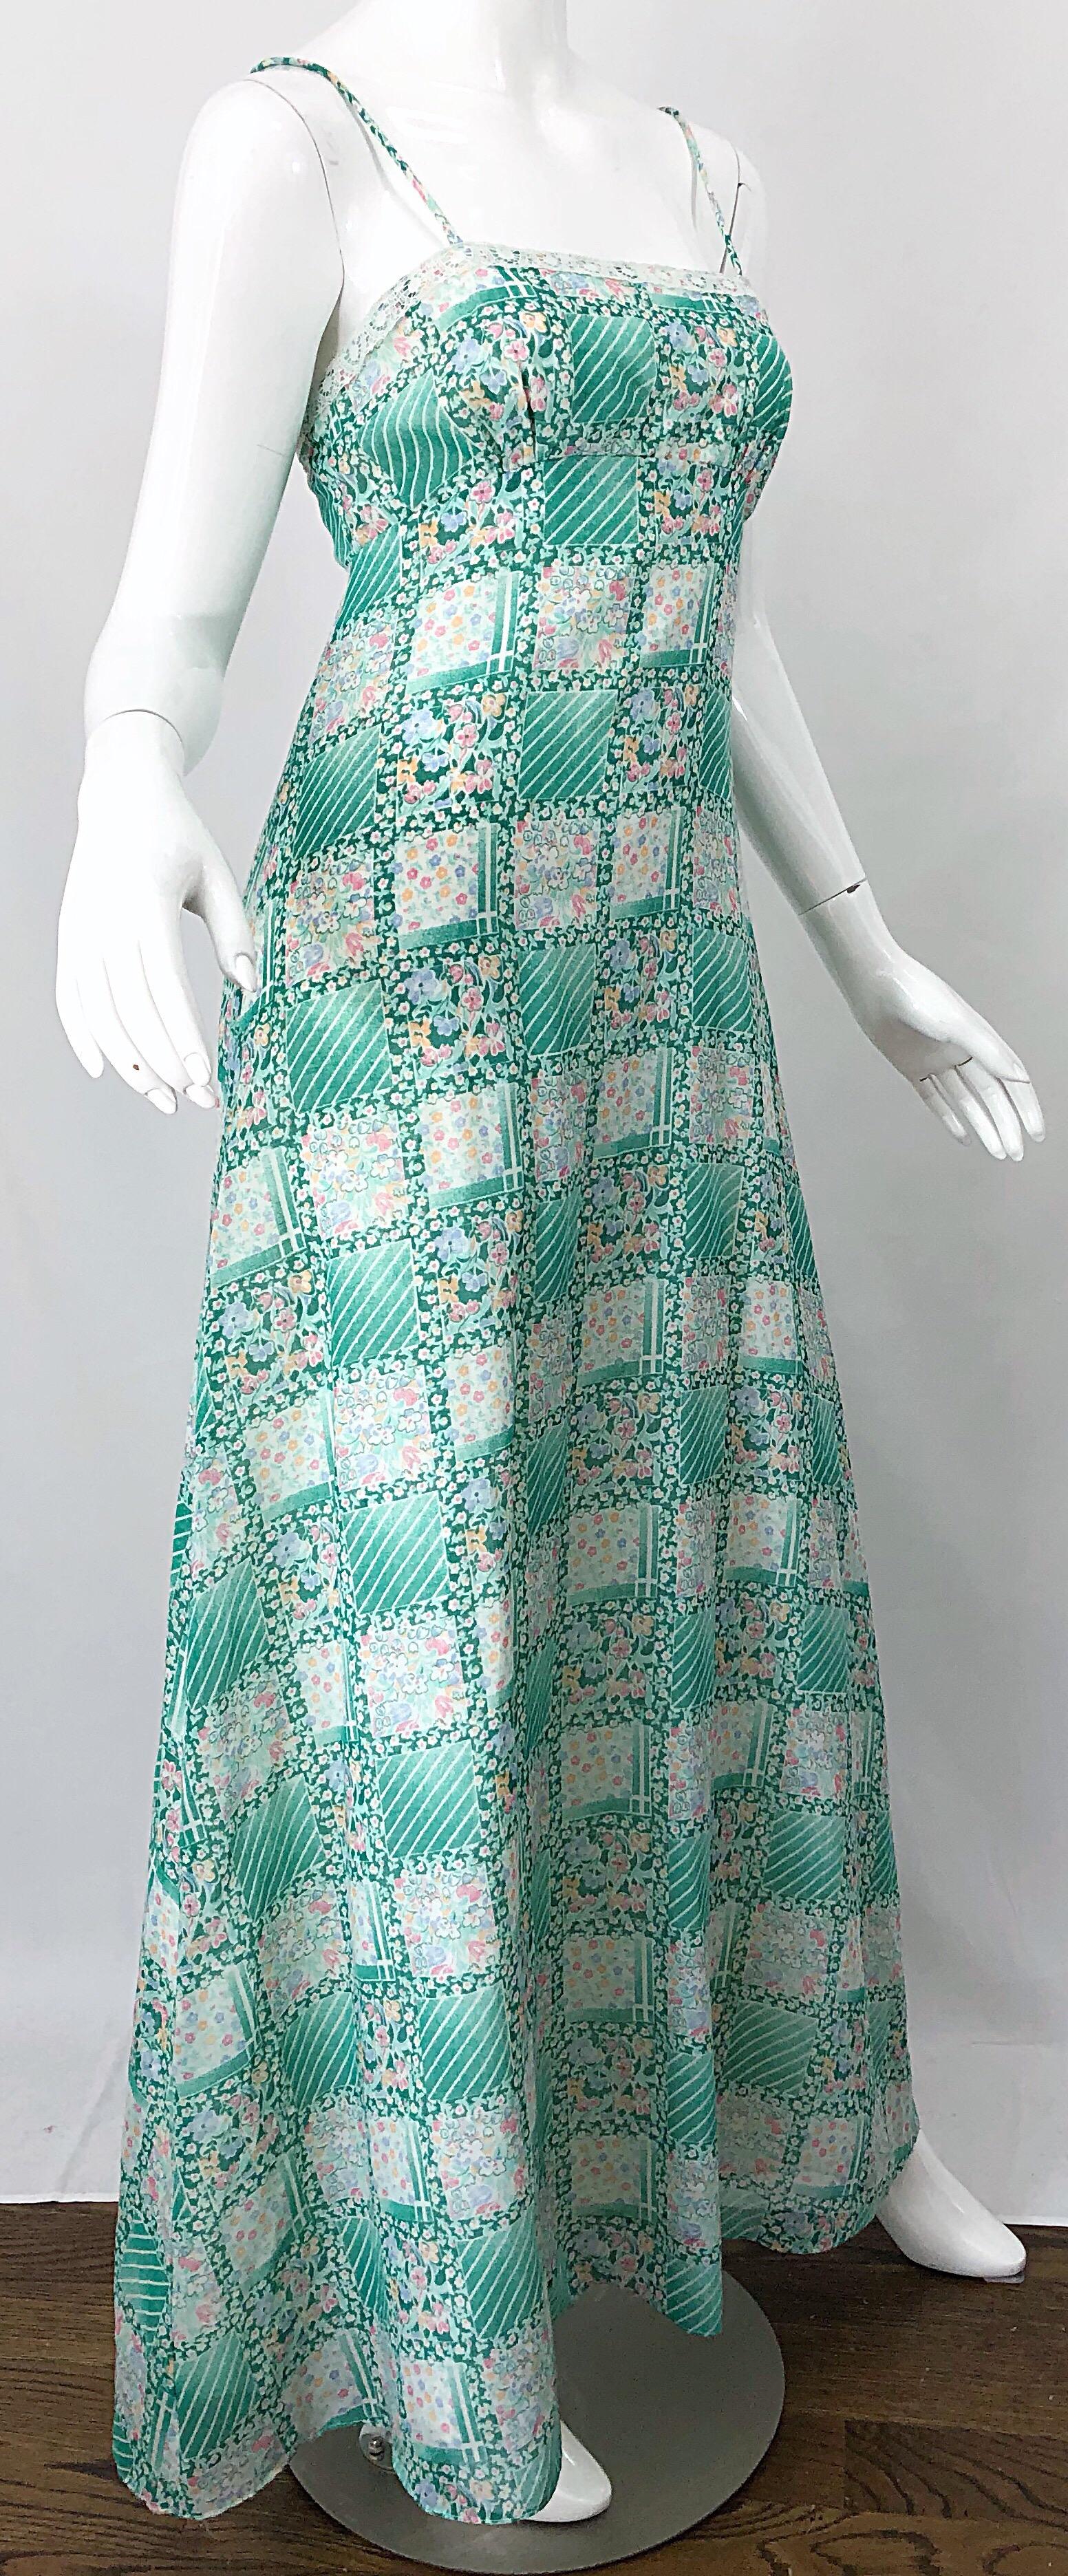 1970s Teal Green Blue Pink Flower Printed Cotton + Lace Vintage 70s Maxi Dress For Sale 2